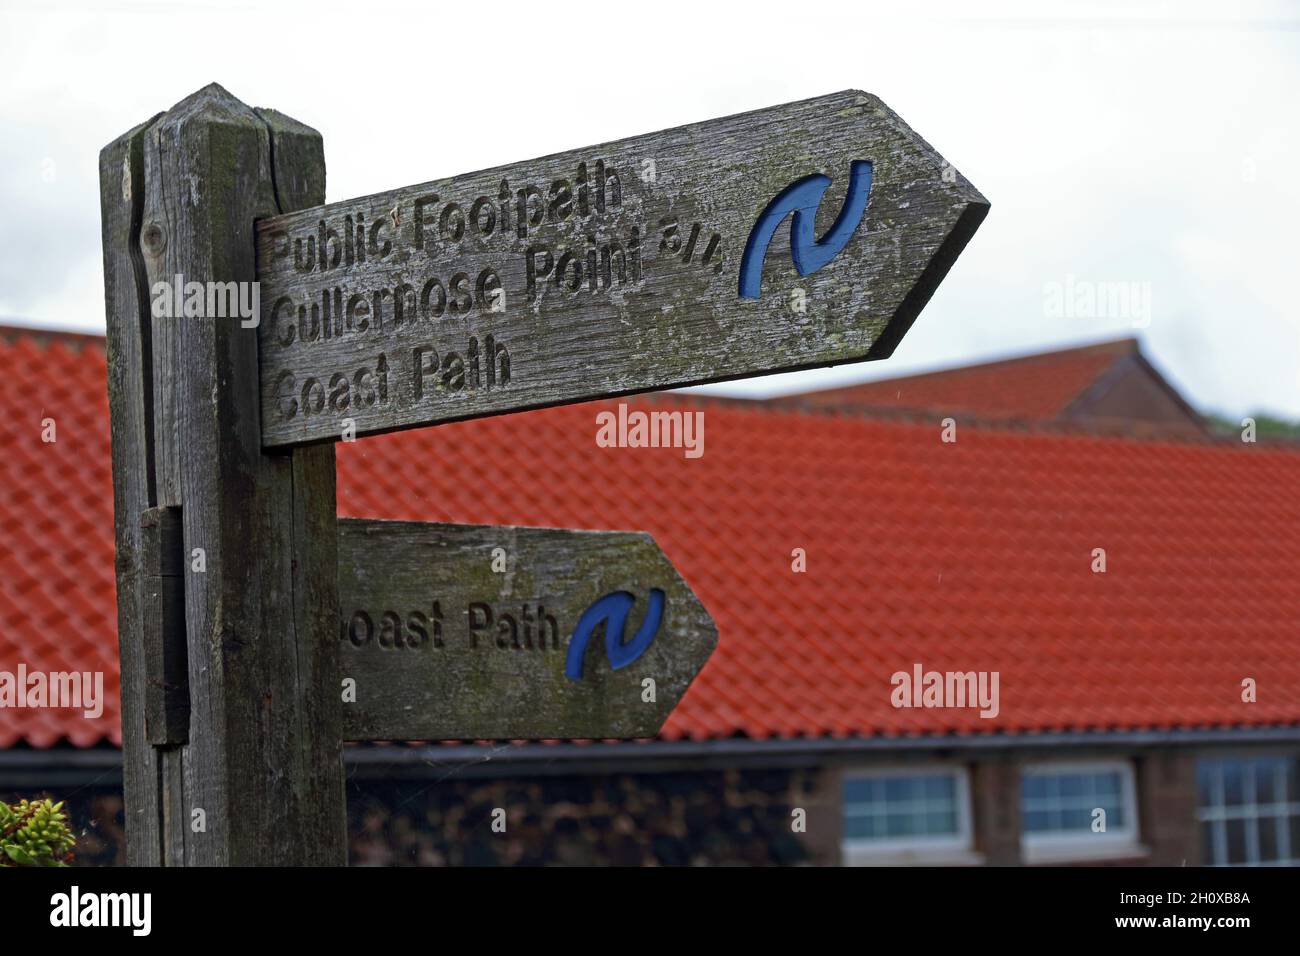 Wooden signpost showing Coast Path, Craster Stock Photo